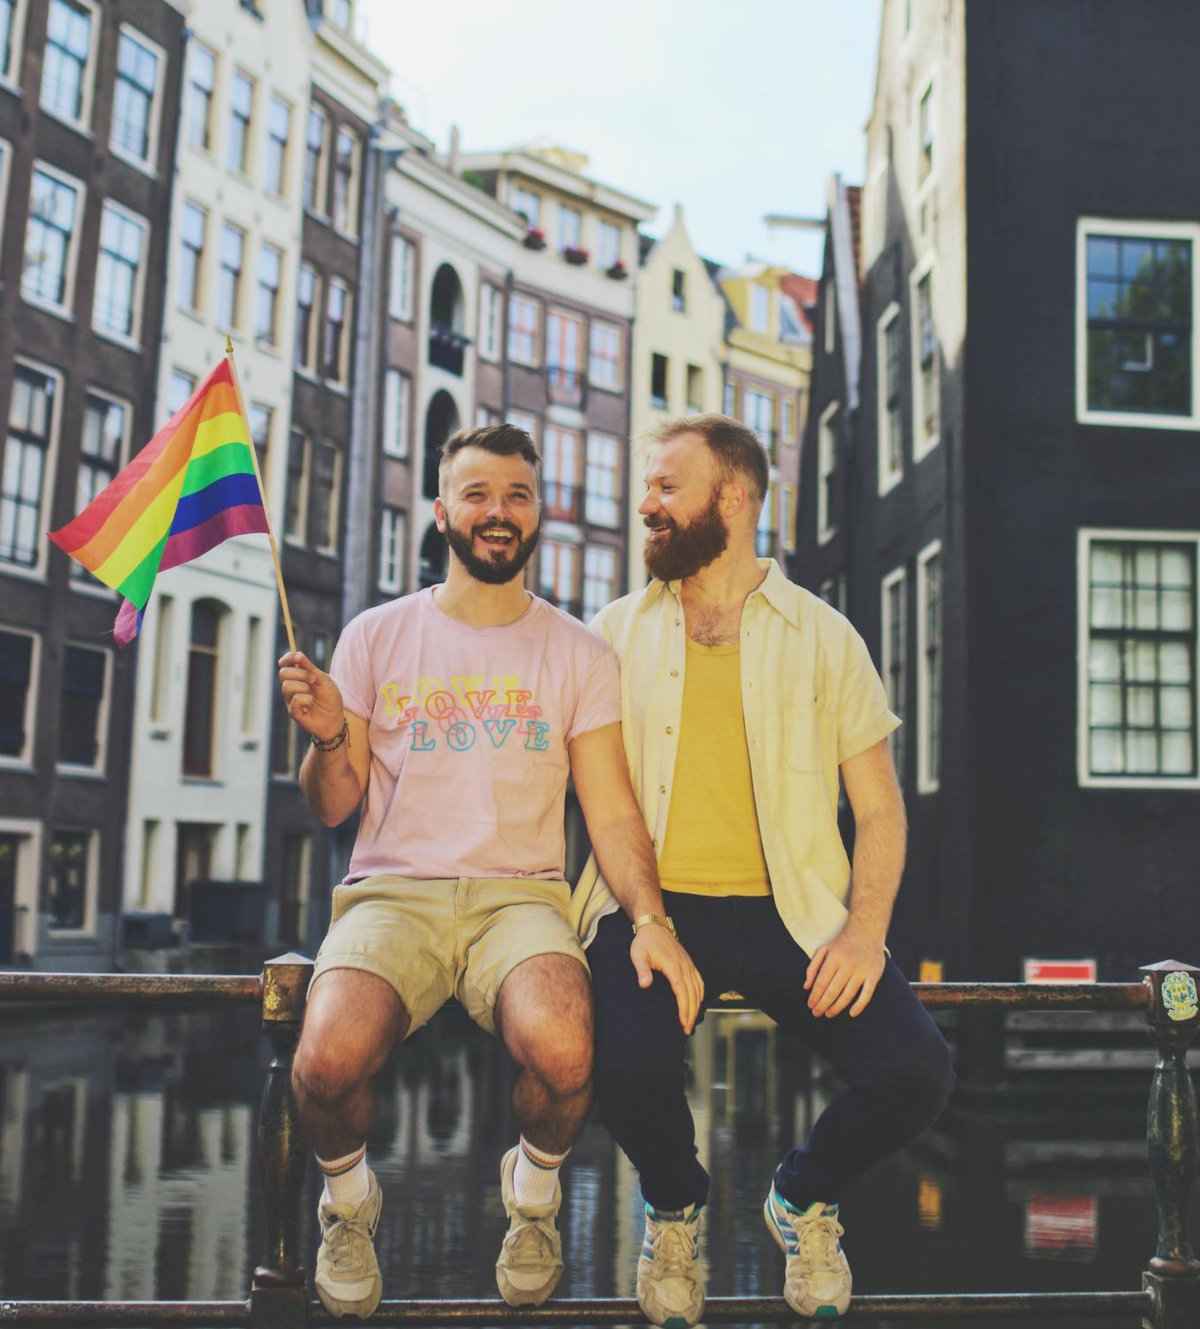 Karl and Daan of Couple of Men sitting next to a canal in Amsterdam while waving a rainbow flag.